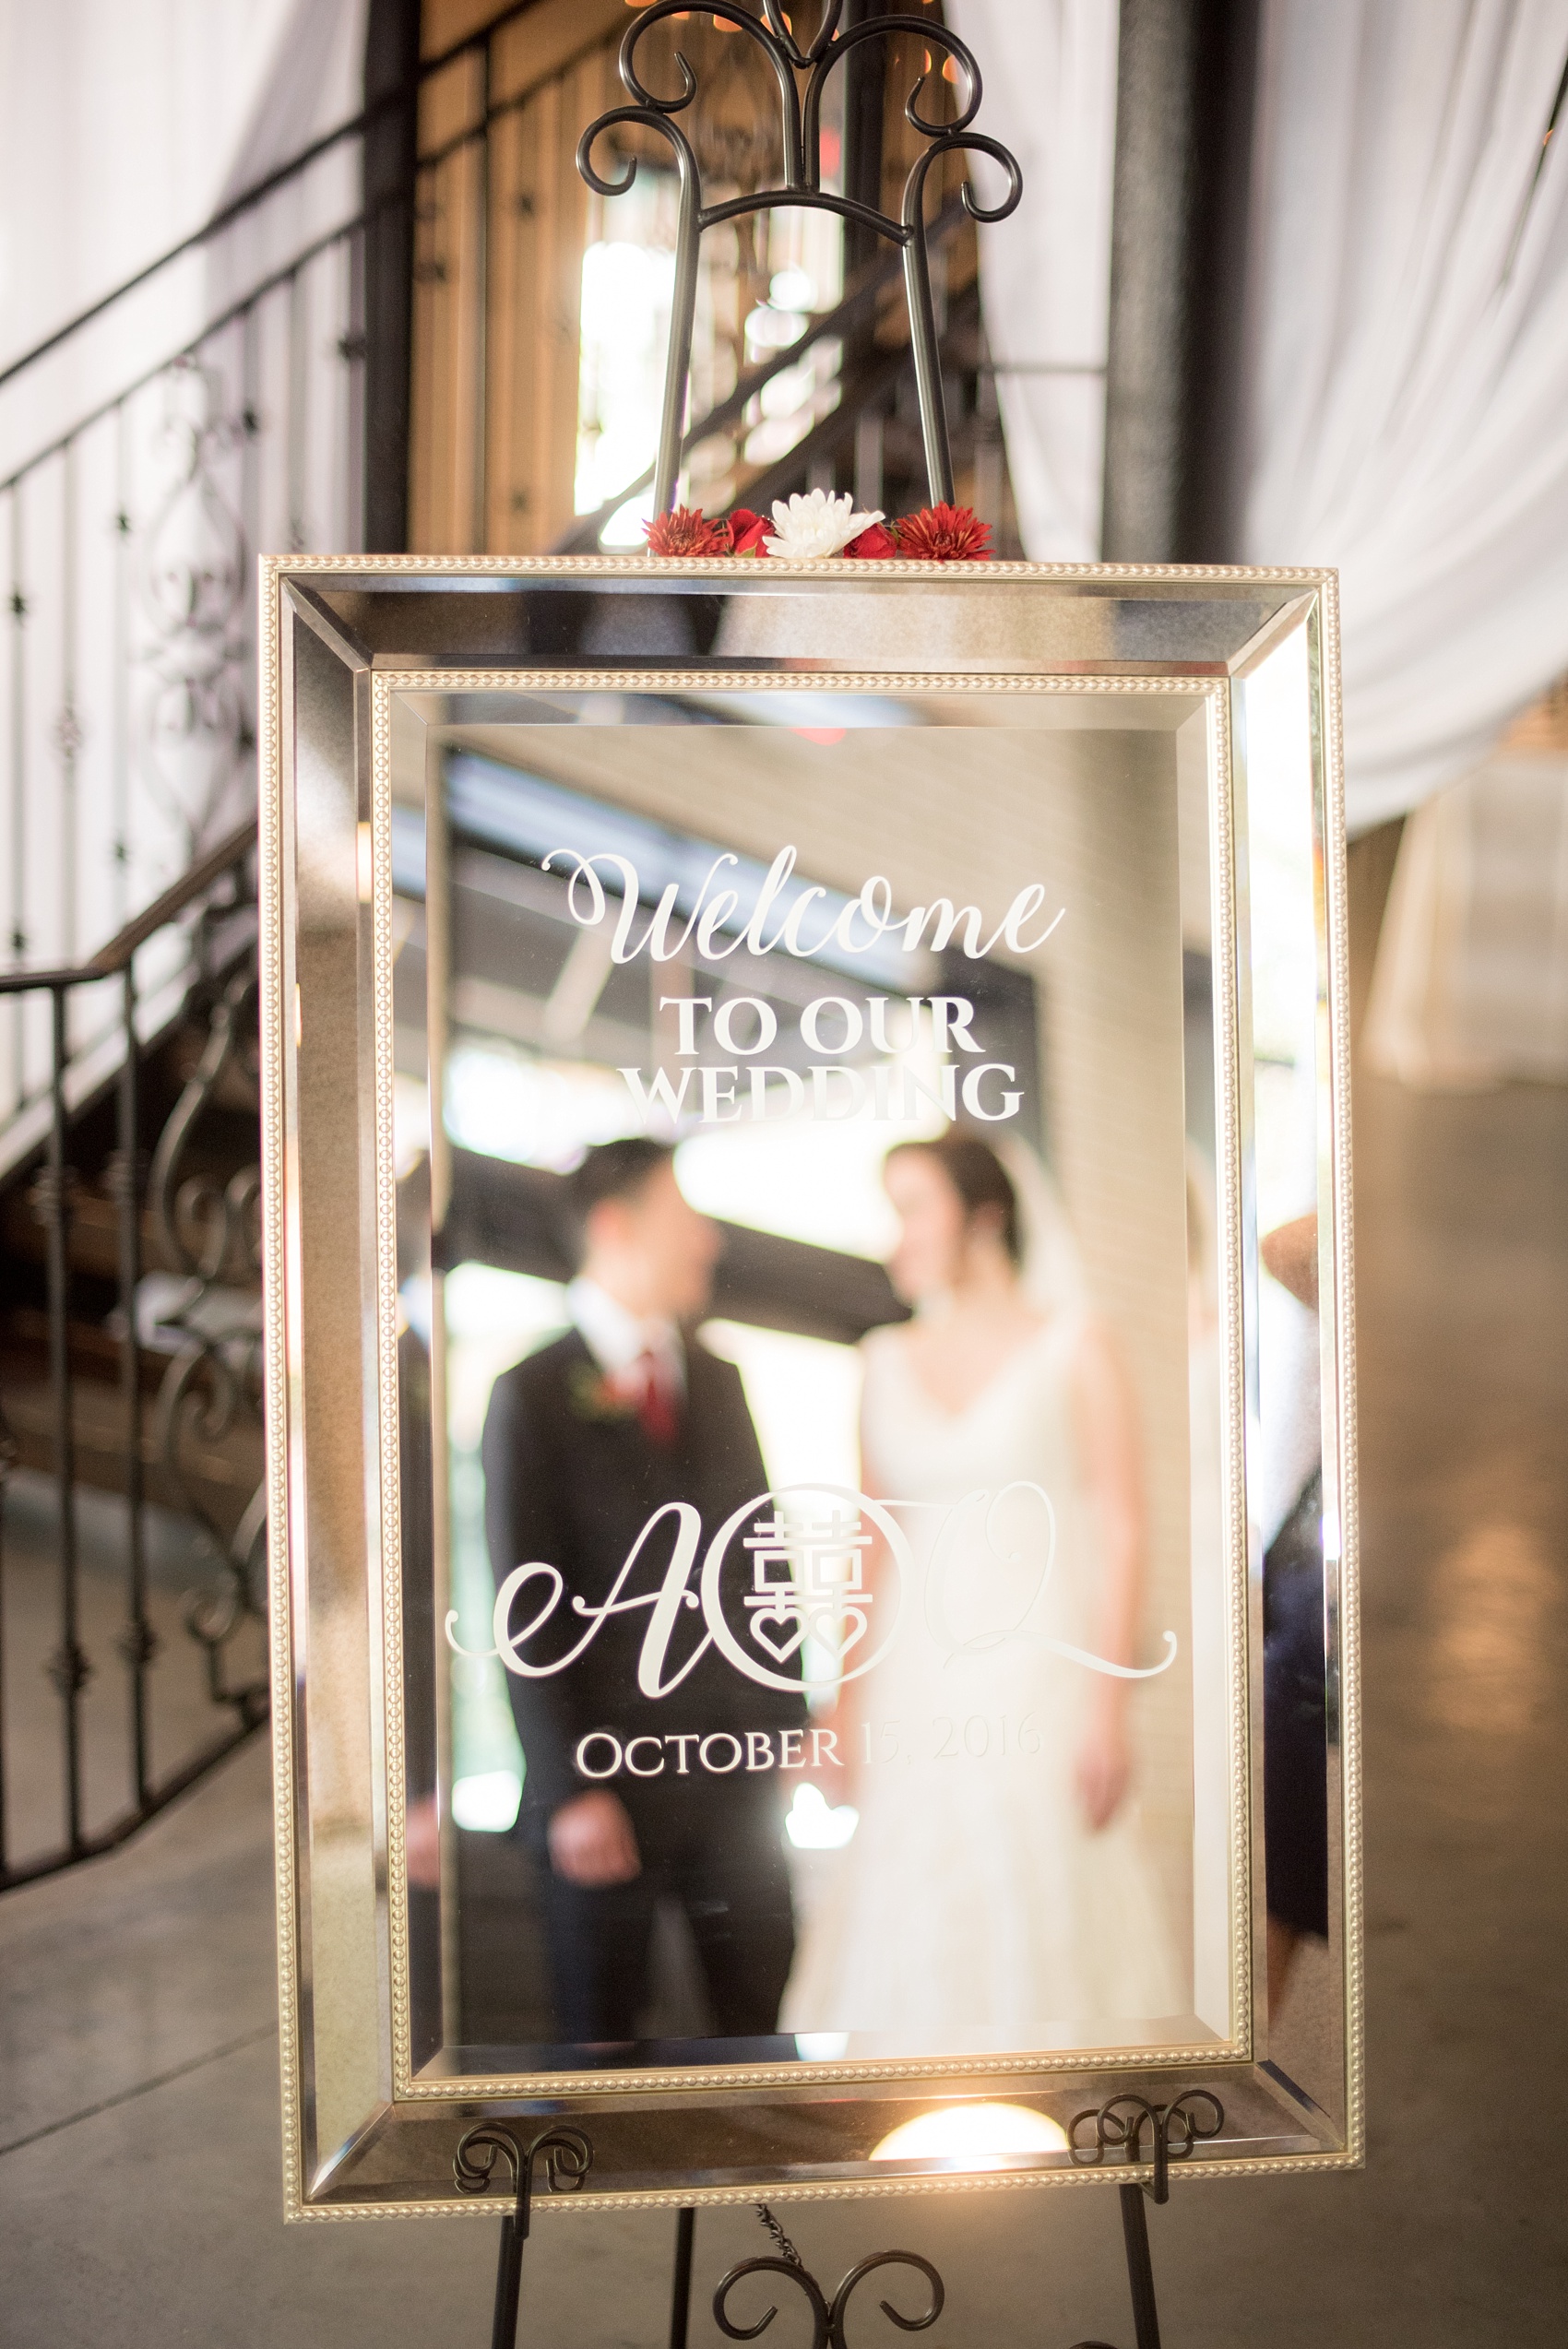 Mikkel Paige Photography photos from a wedding at 214 Martin Street in downtown Raleigh with a custom mirror sign.